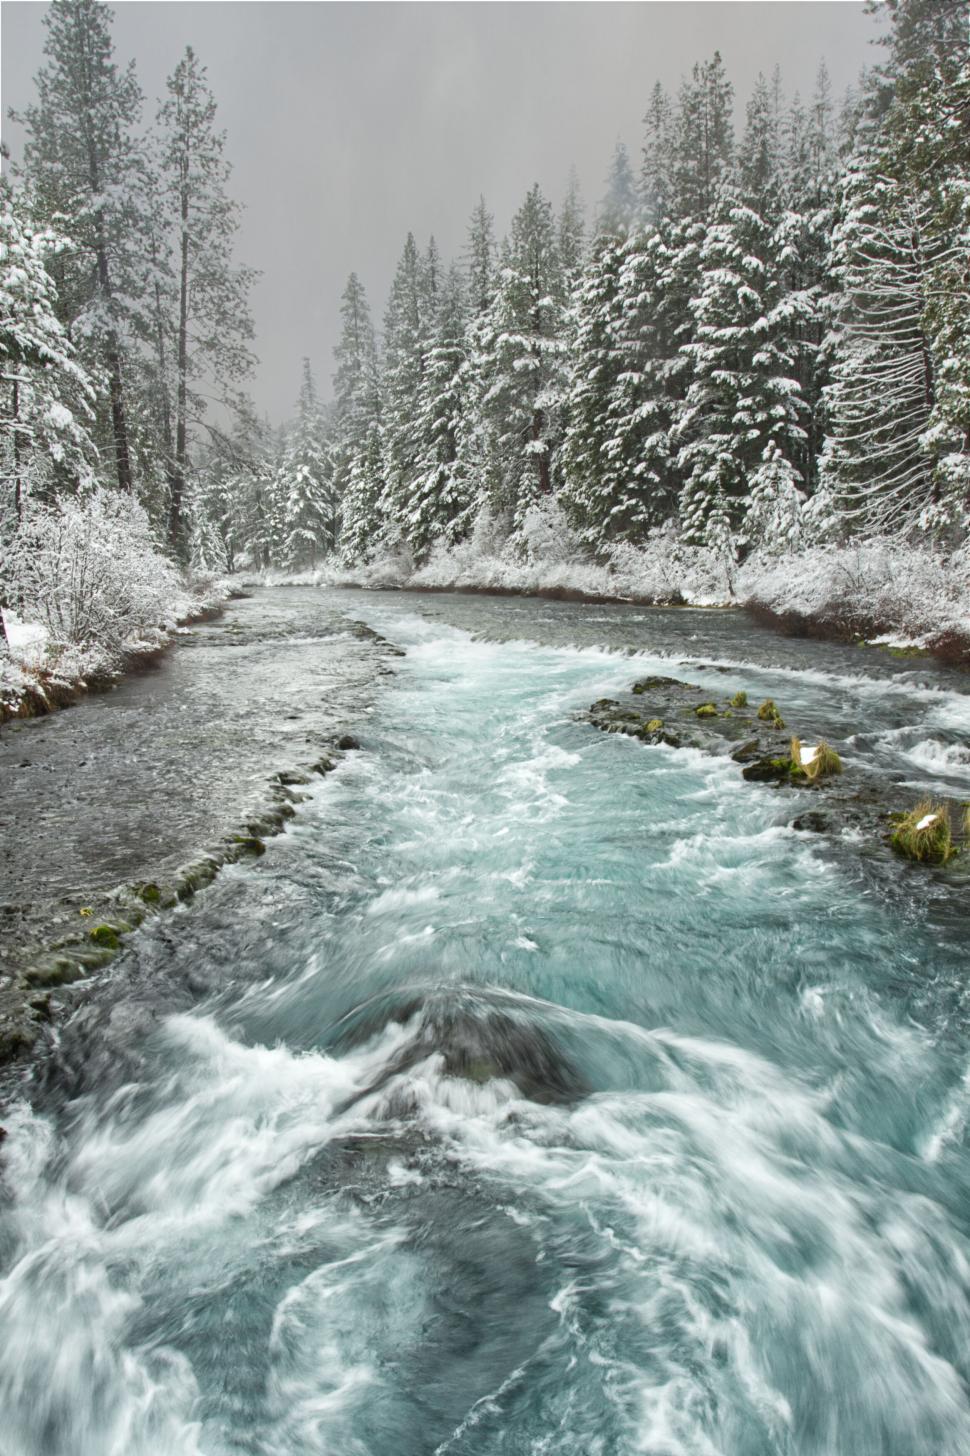 Free Image of River flowing vigorously through snowy forest 